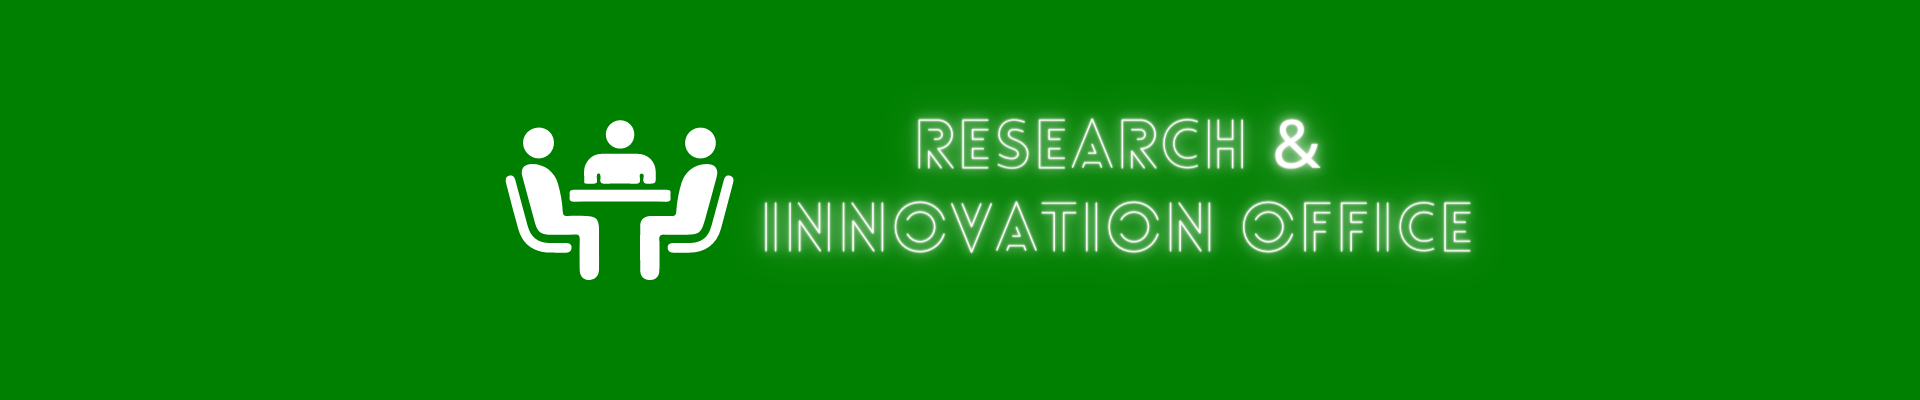 Research & Innovation Office